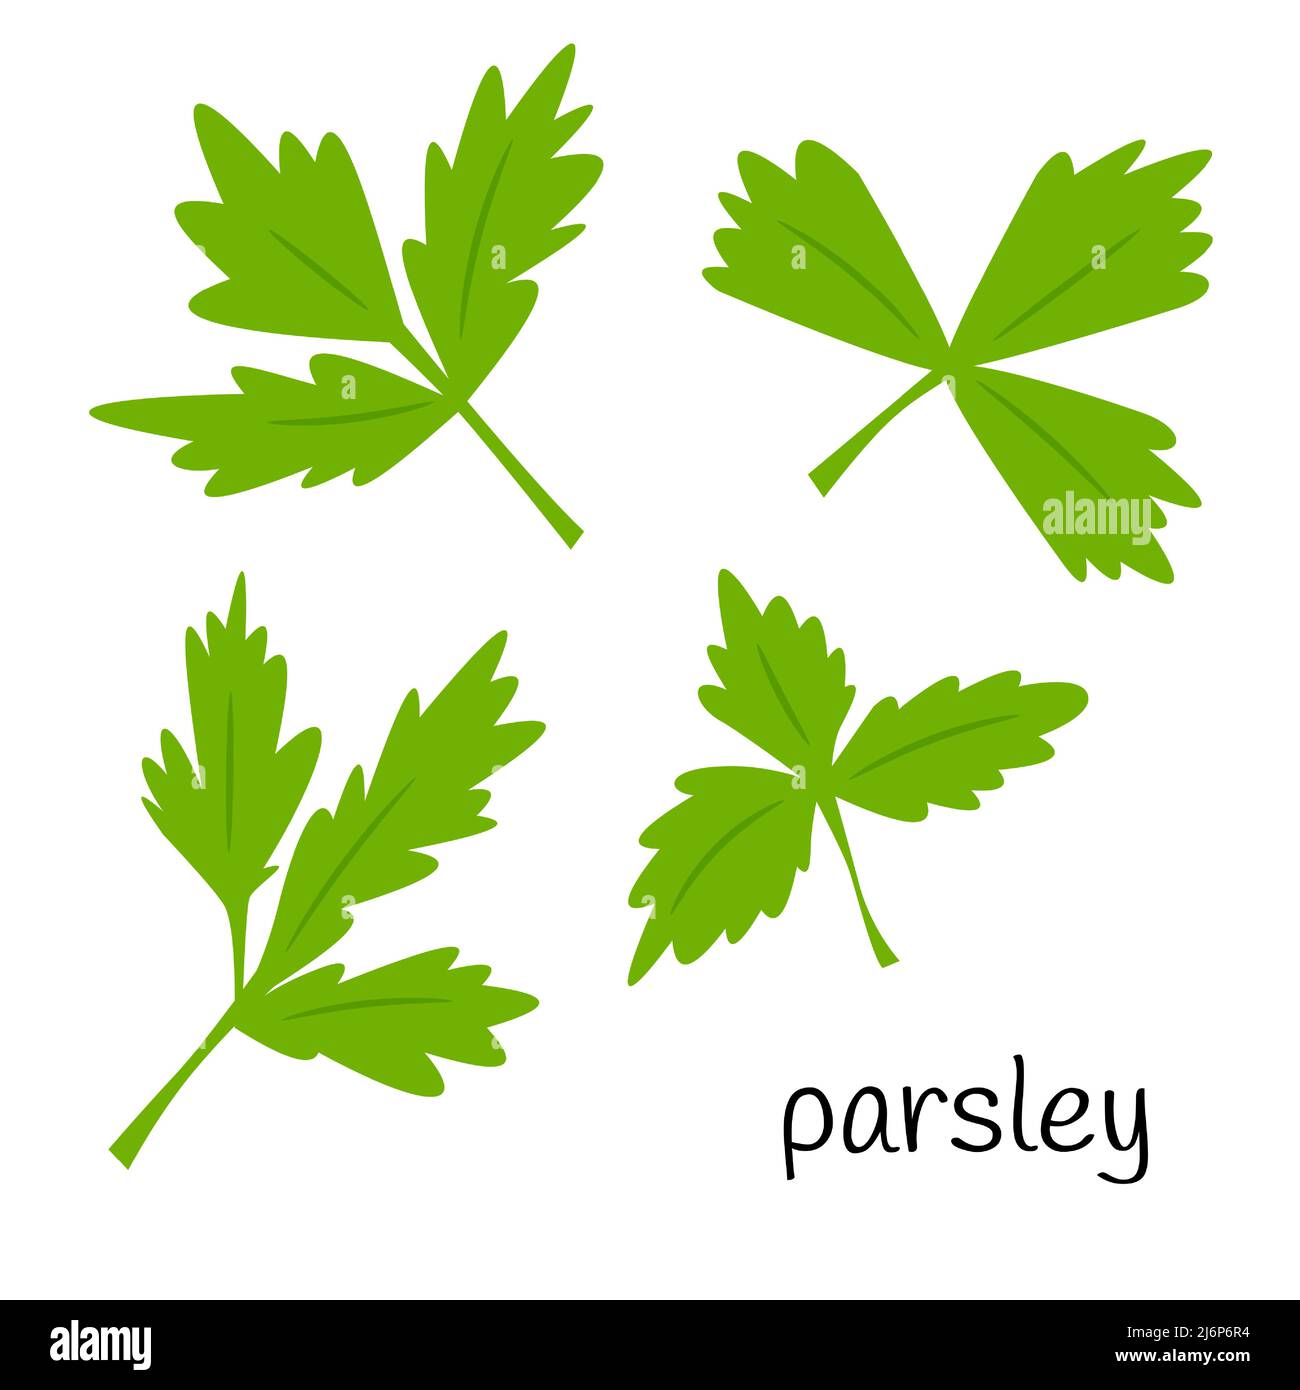 Parsley leaves, greens for salad. Ingredient, an element for the design of food packaging, recipes, and menus. Isolated on a white background vector i Stock Vector